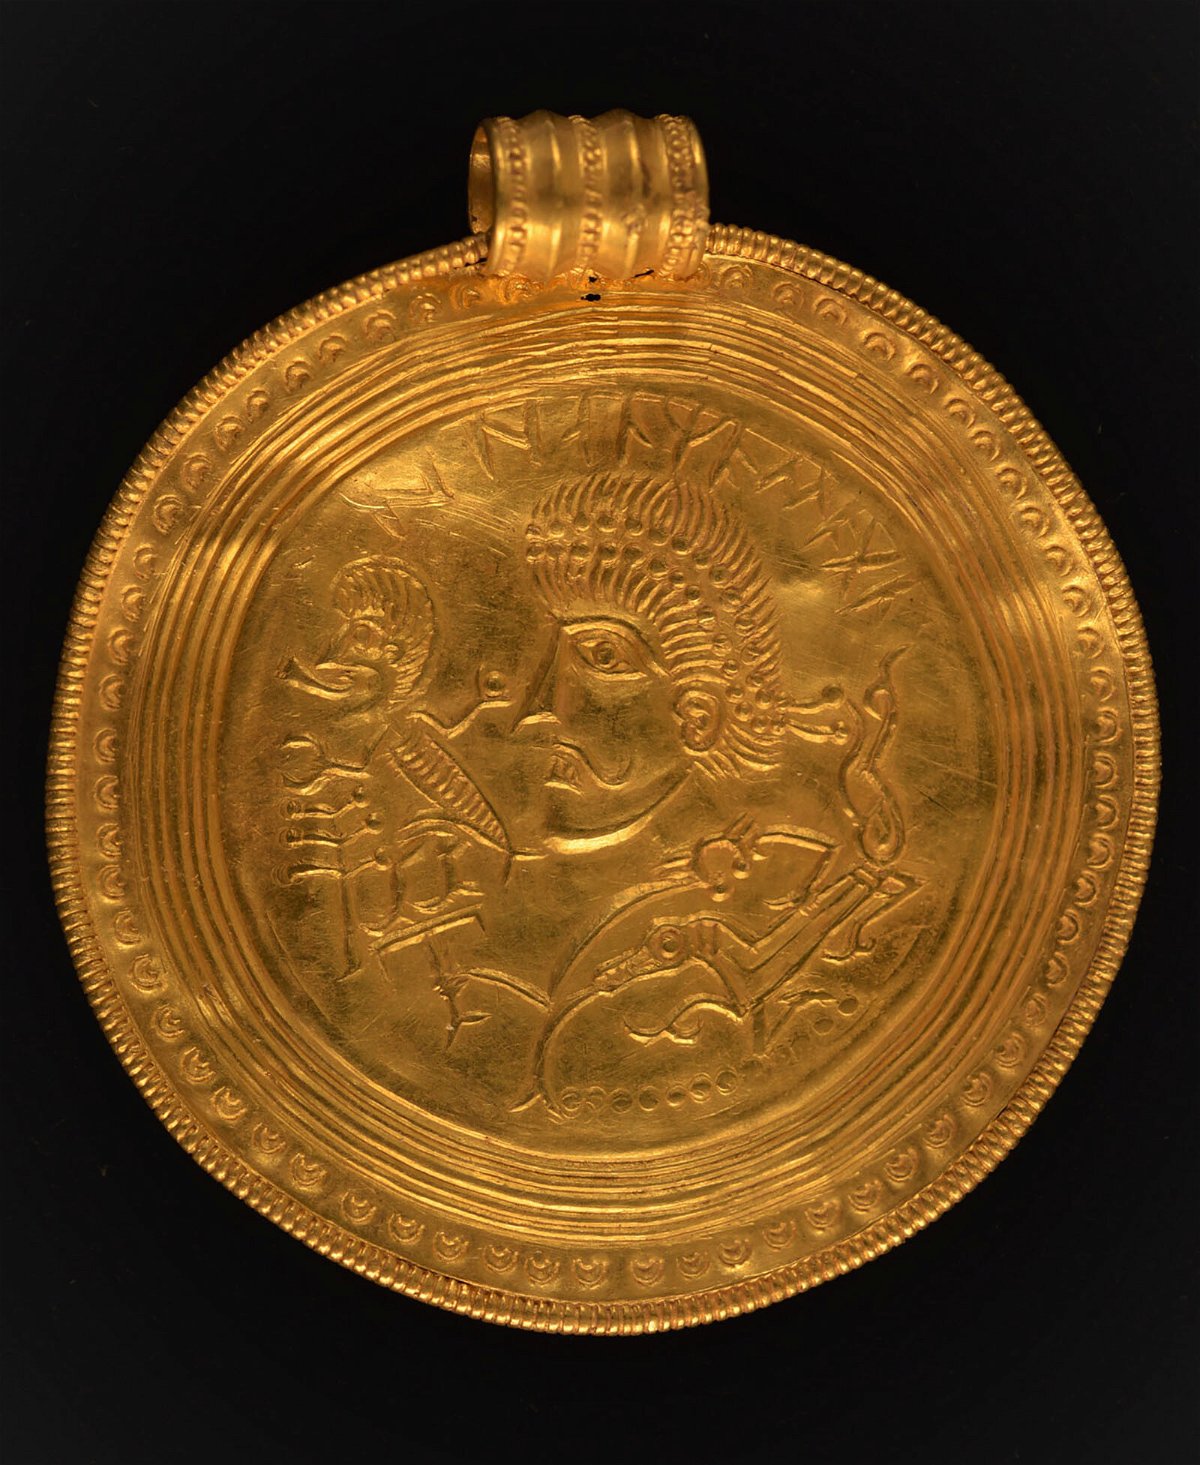 <i>Conservation Center Vejle</i><br/>Some of the medallions are as large as saucers.